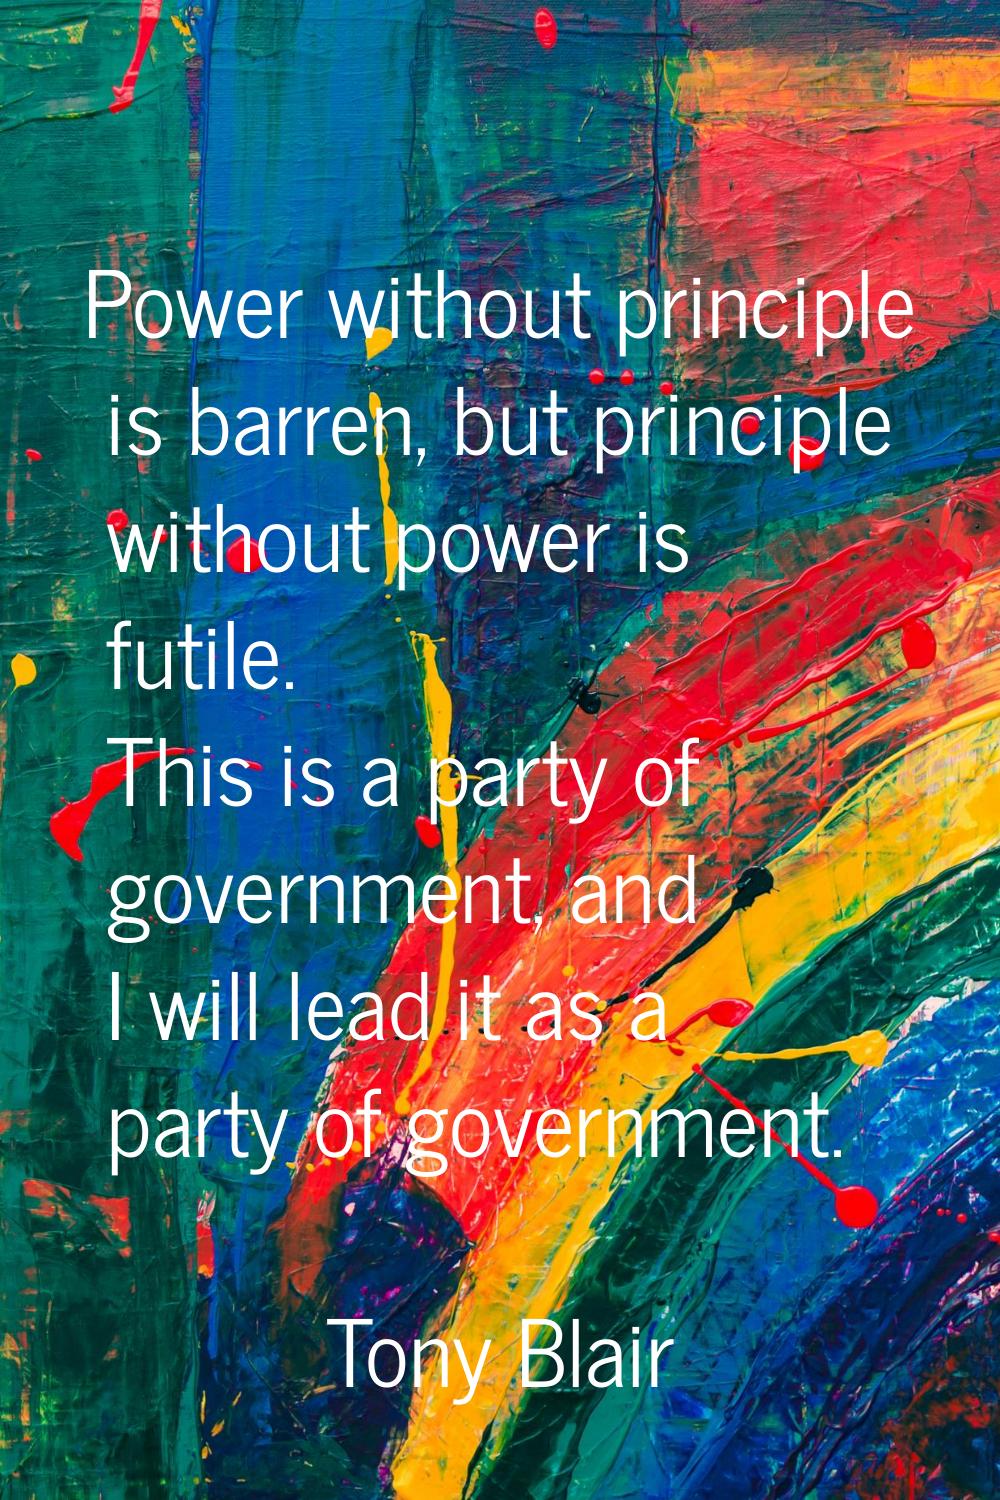 Power without principle is barren, but principle without power is futile. This is a party of govern